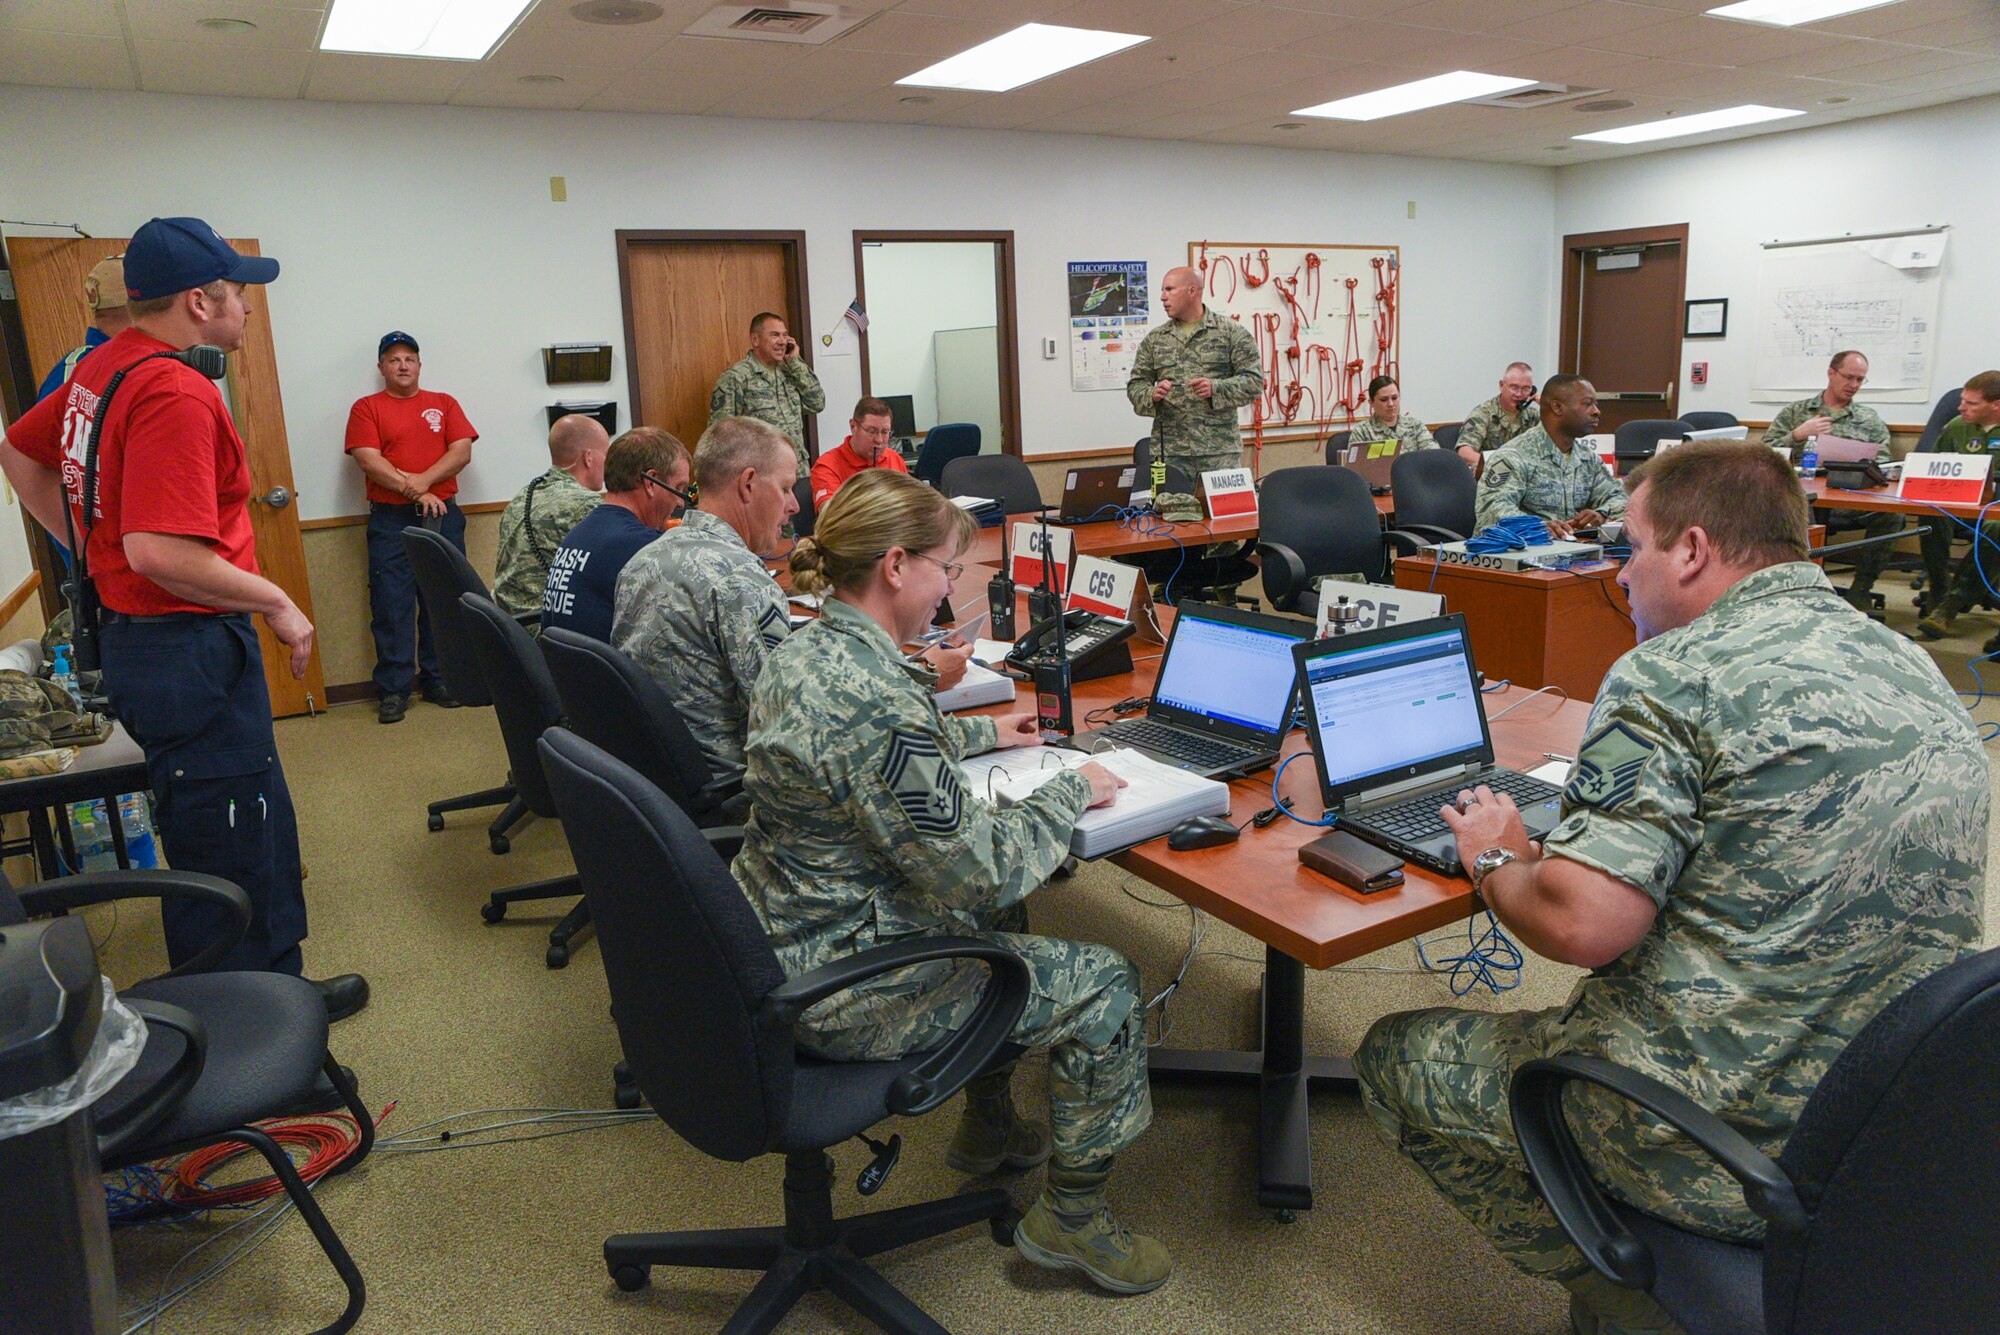 Airmen assigned to the 153rd Airlift Wing Wyoming Air National Guard stand up the emergency operations center in response to a simulated chlorine plume, June 19, 2015, at Cheyenne Air National Guard base in Cheyenne, Wyo. Civilian and military emergency responders are participating in Counter-CBRN All-Hazard Management Response (CAMR) training which provides instruction on chemical, biological, radiological, first response, medical, and incident command for possible threats in the region. (U.S. Air National Guard photo by Master Sgt. Charles Delano)